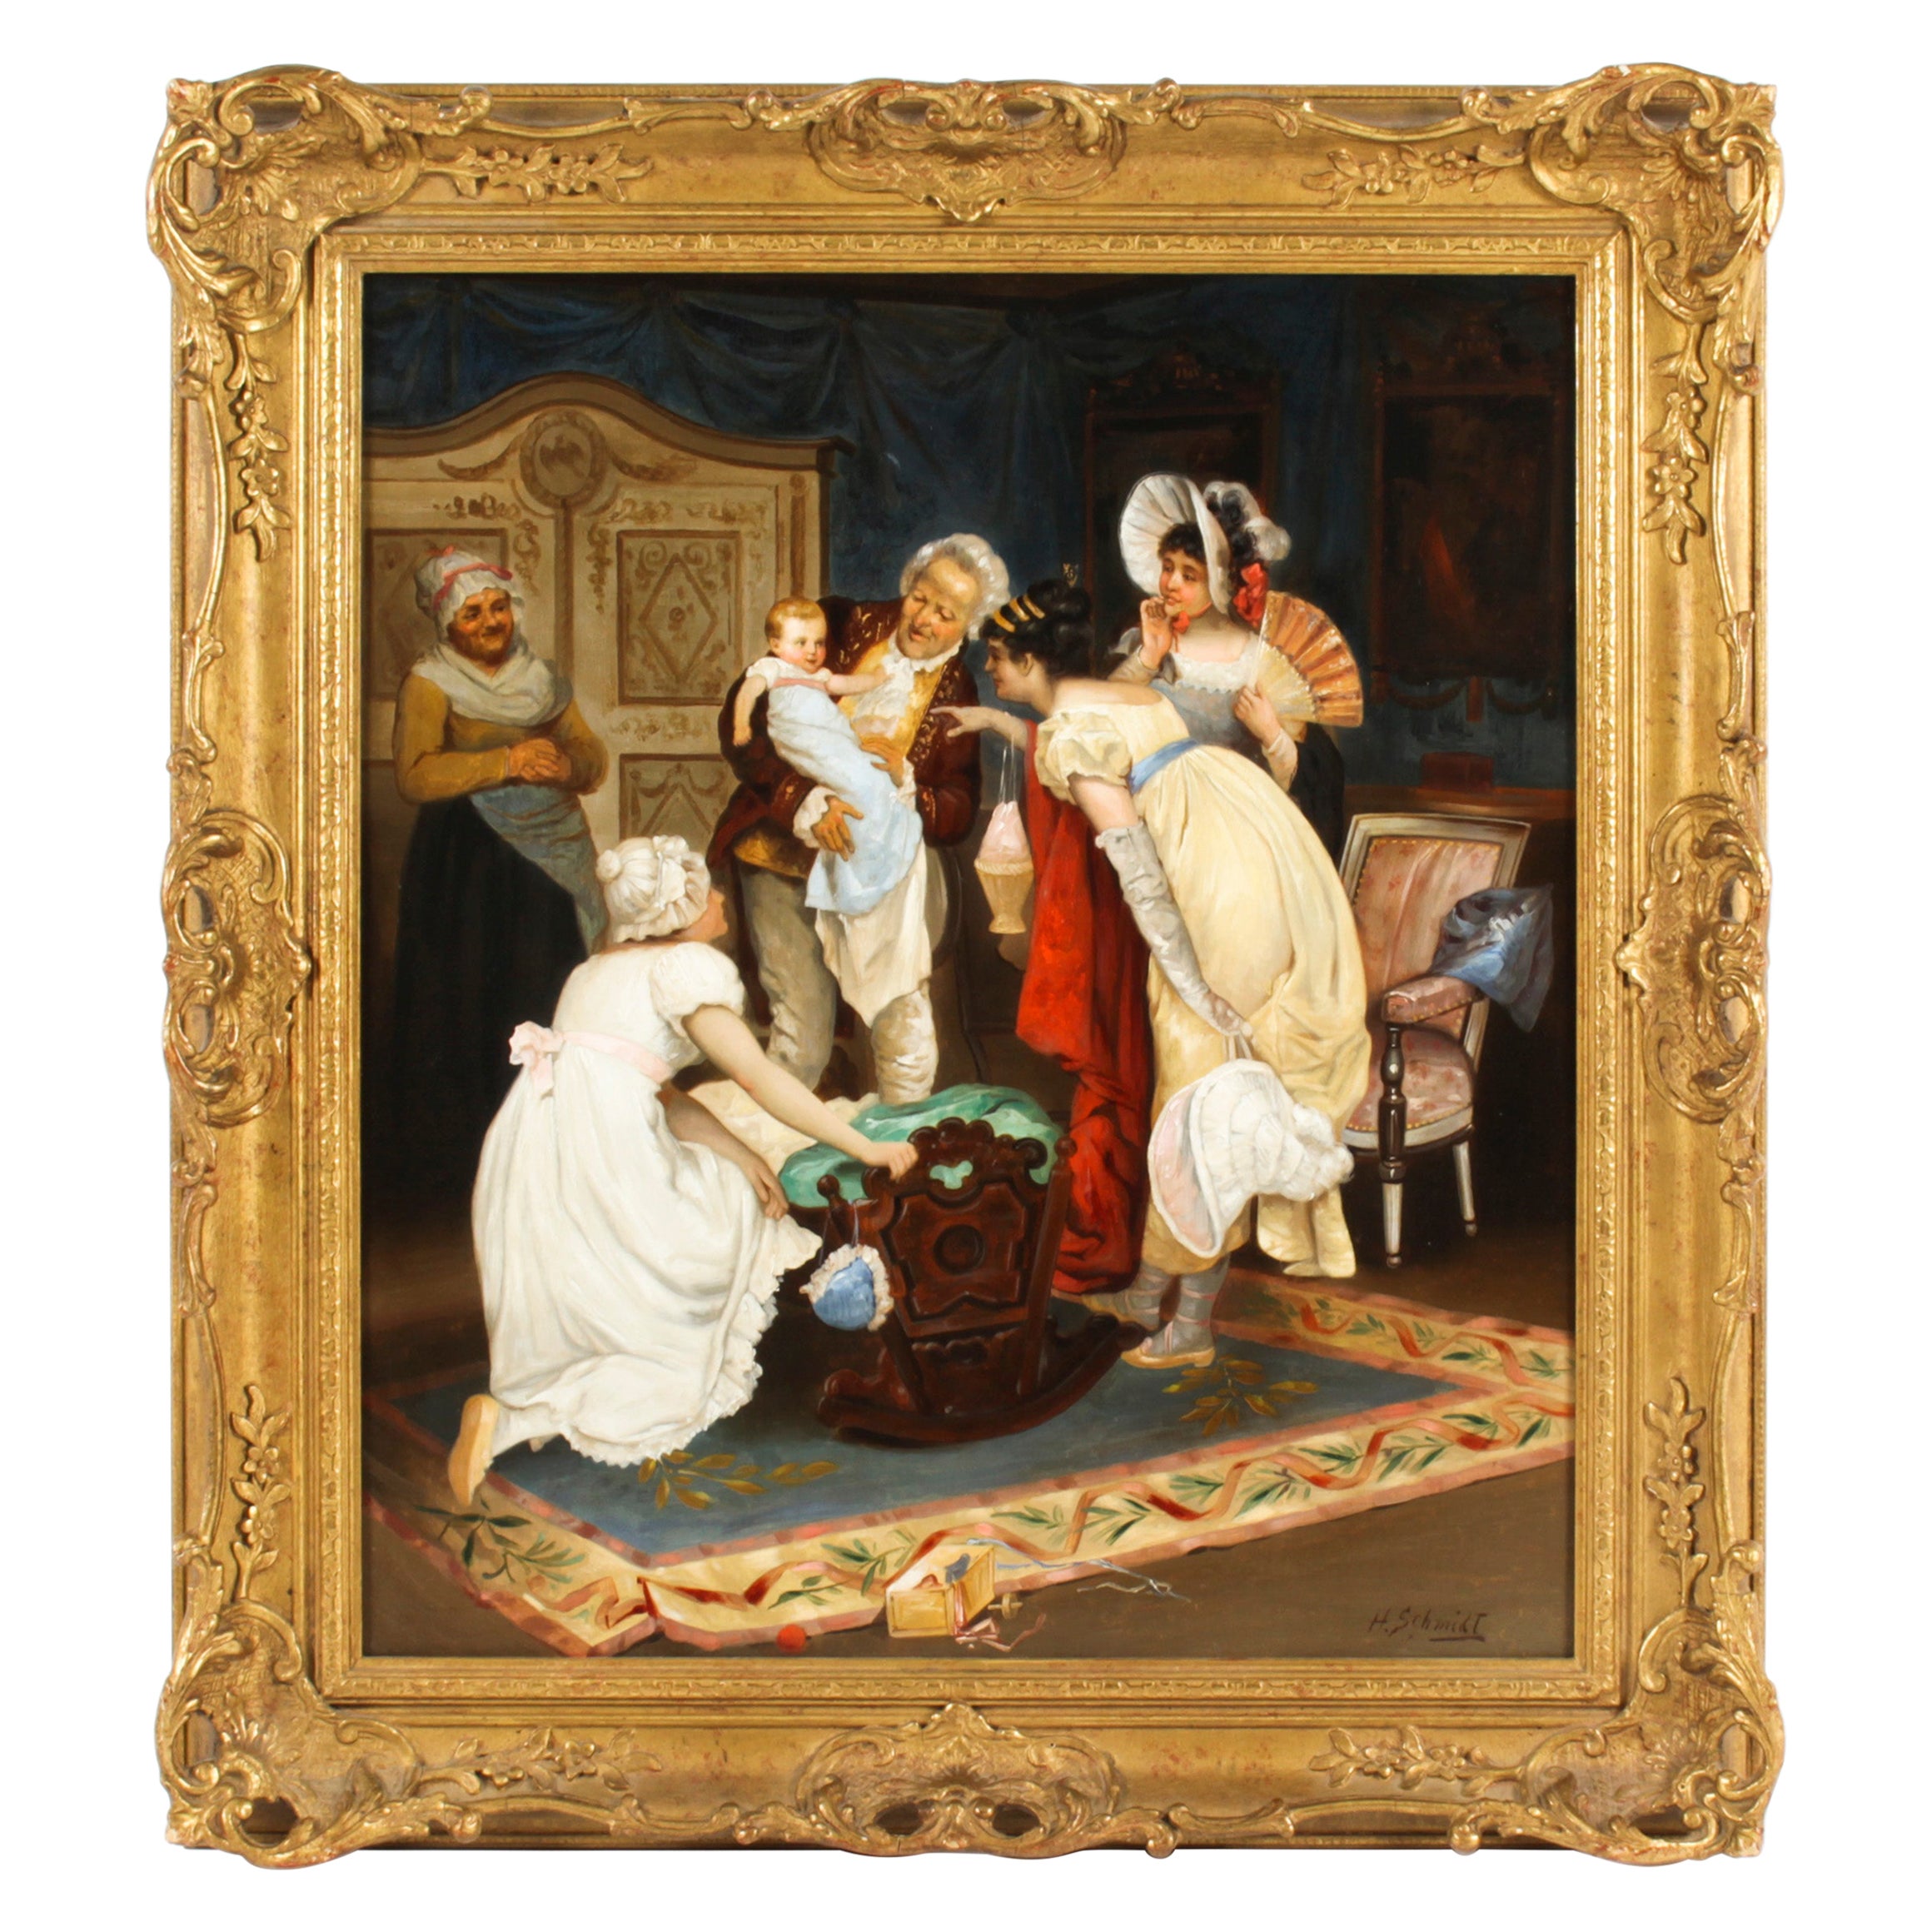 Antique Oil Painting "The Centre of Attention" H Schmidt 19th C